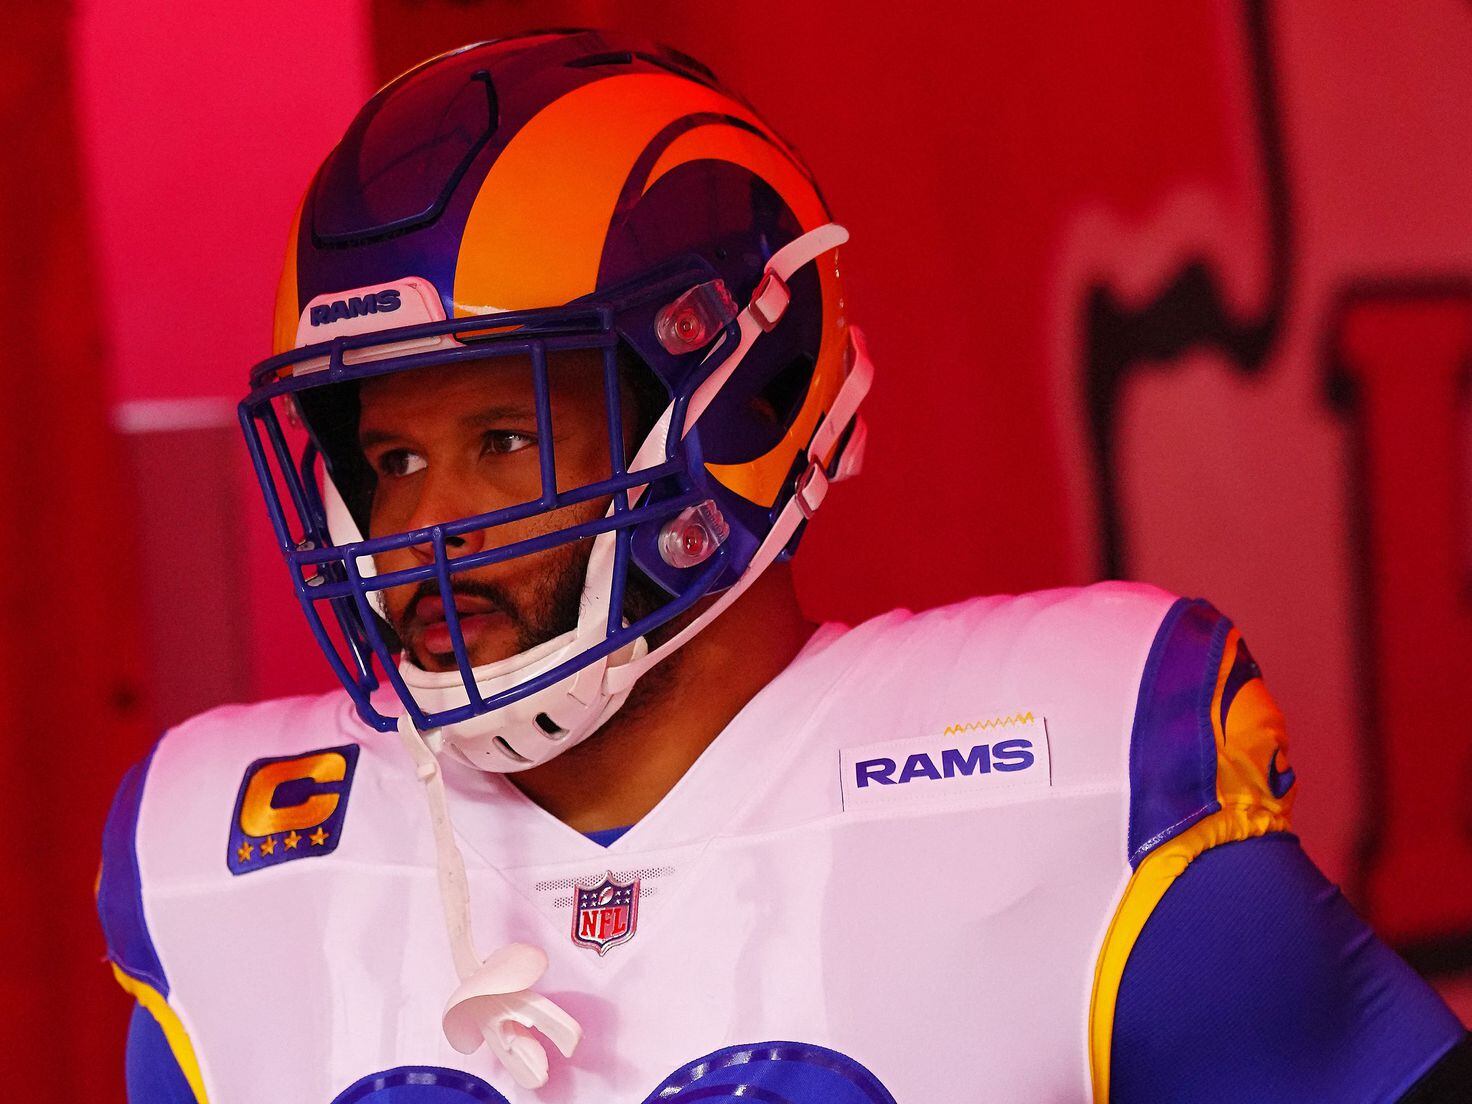 Rams vs Packers NFL week 15 injury report: Will Aaron Donald and